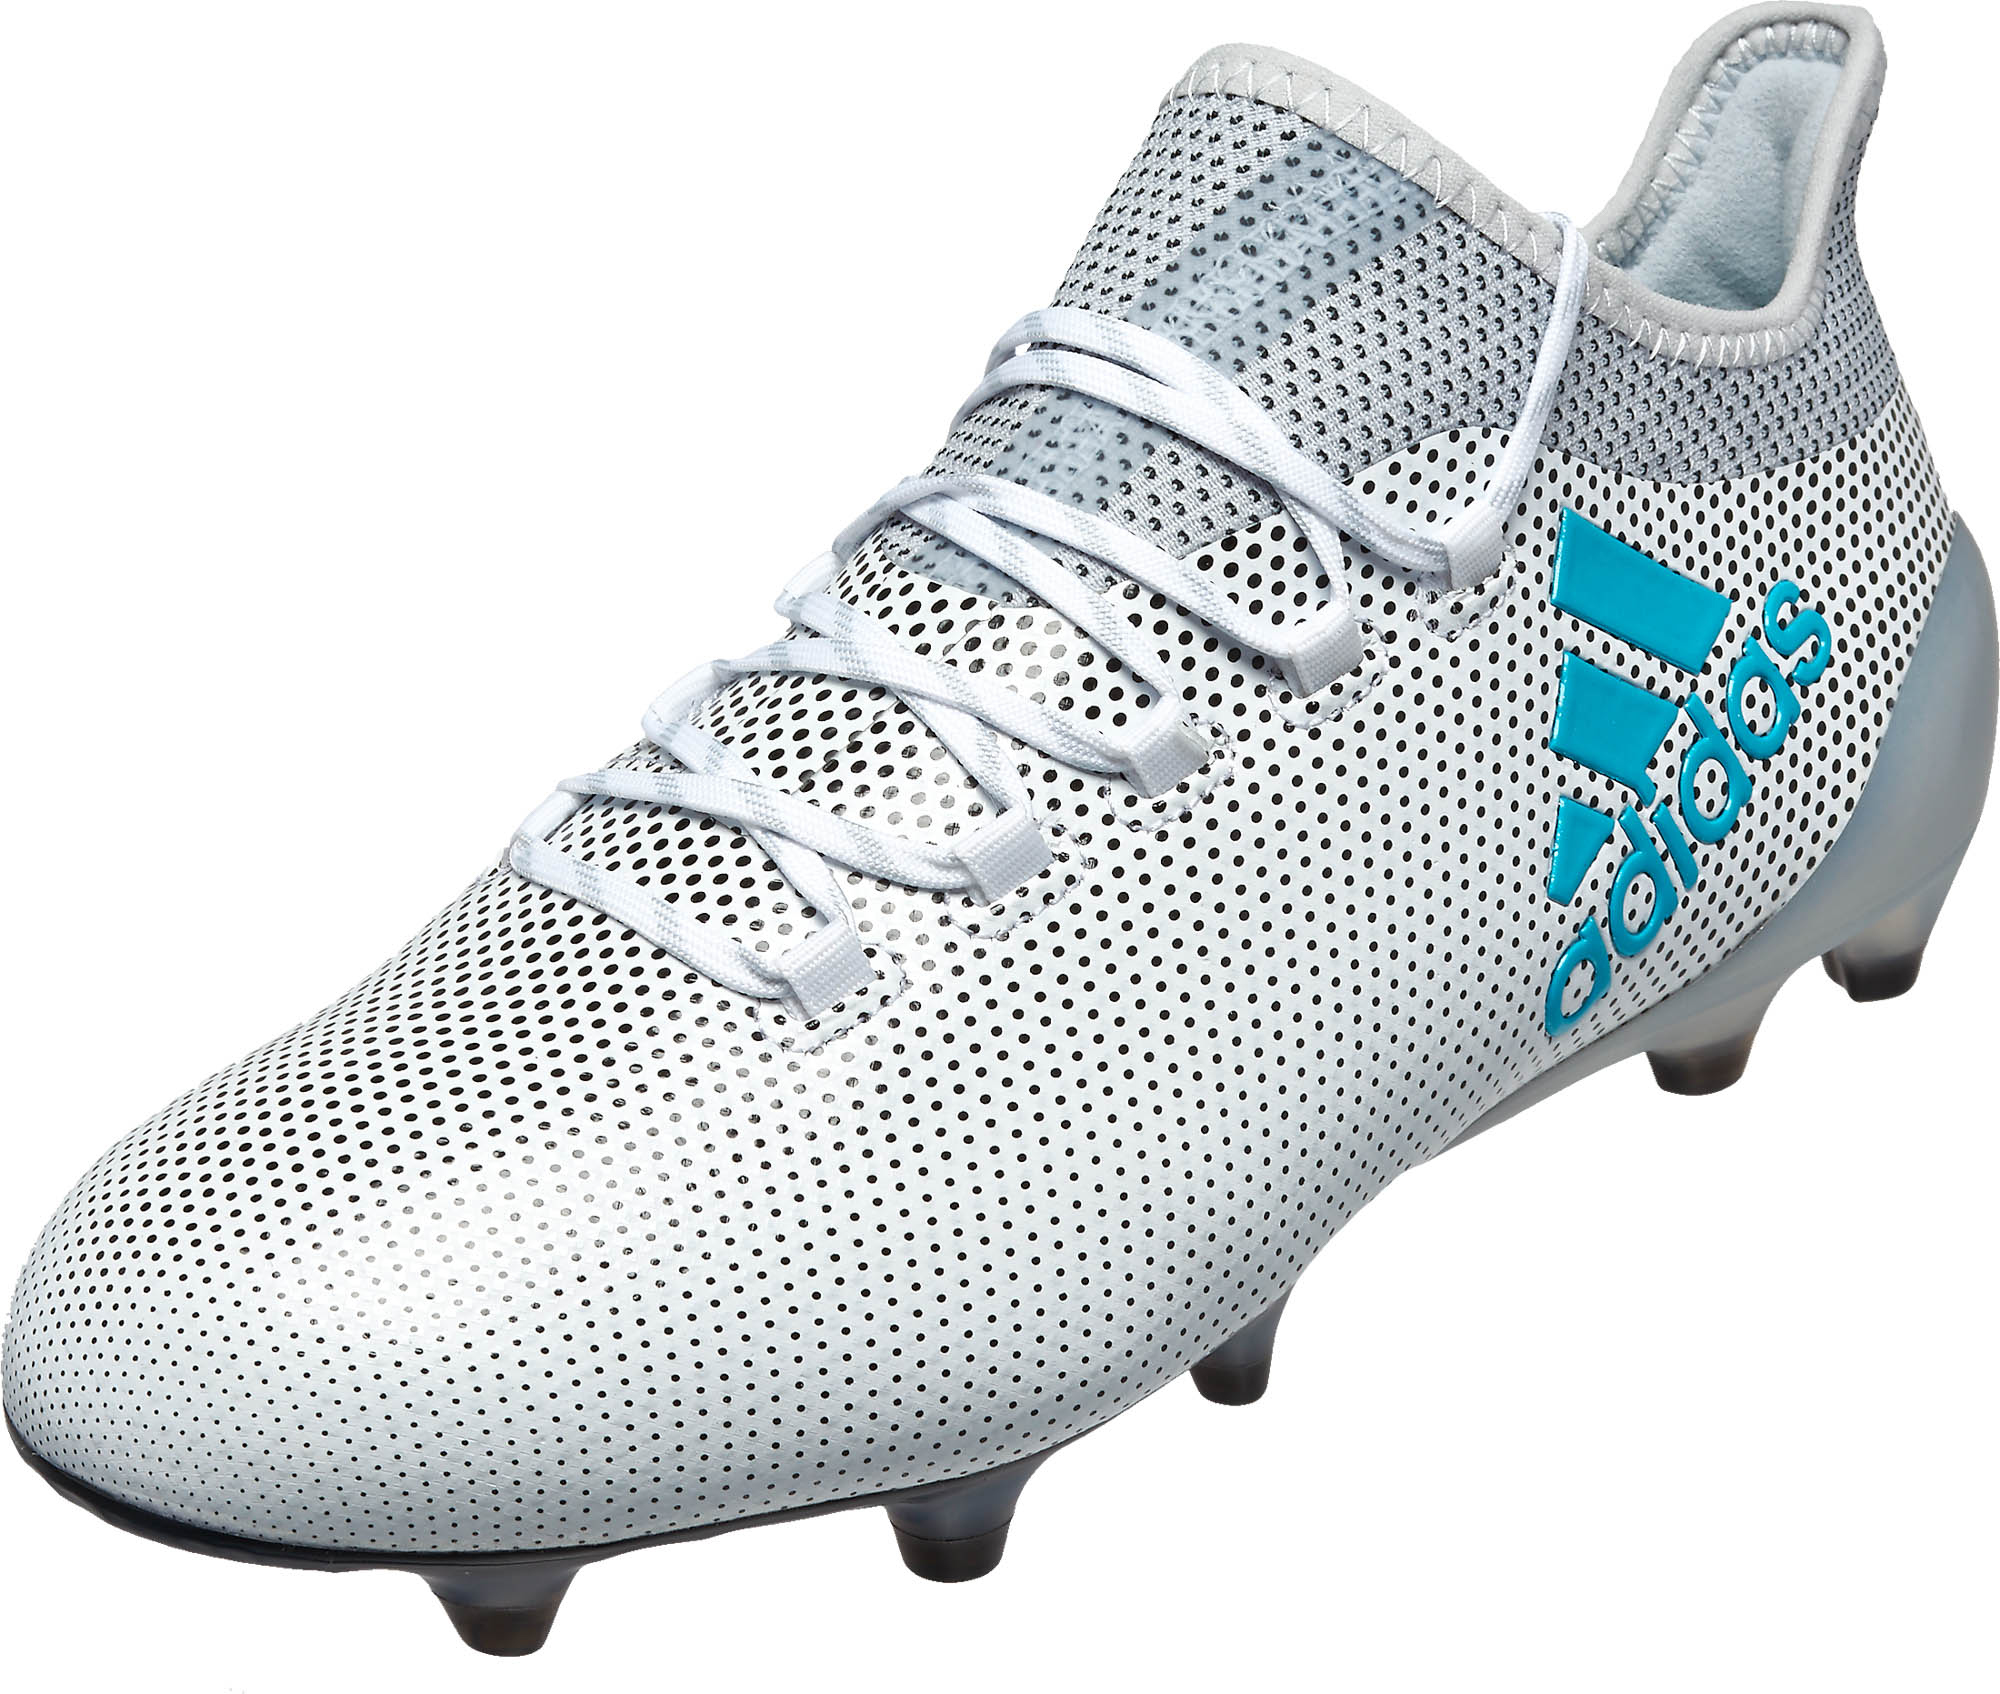 adidas white soccer shoes